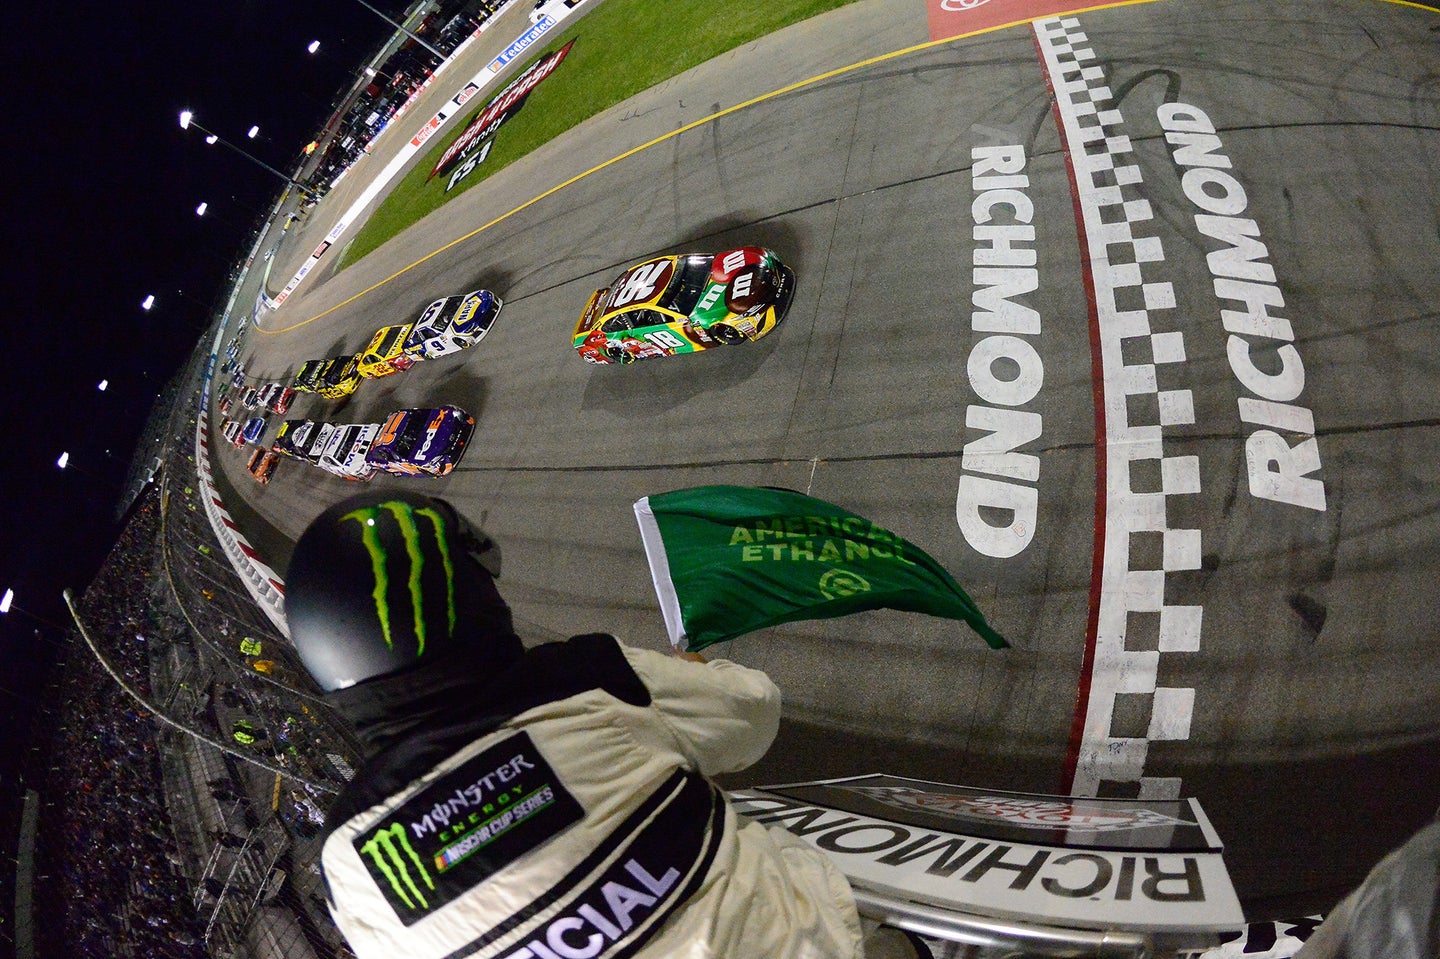 Victory at Richmond Makes Three Consecutive NASCAR Cup Wins for Kyle Busch